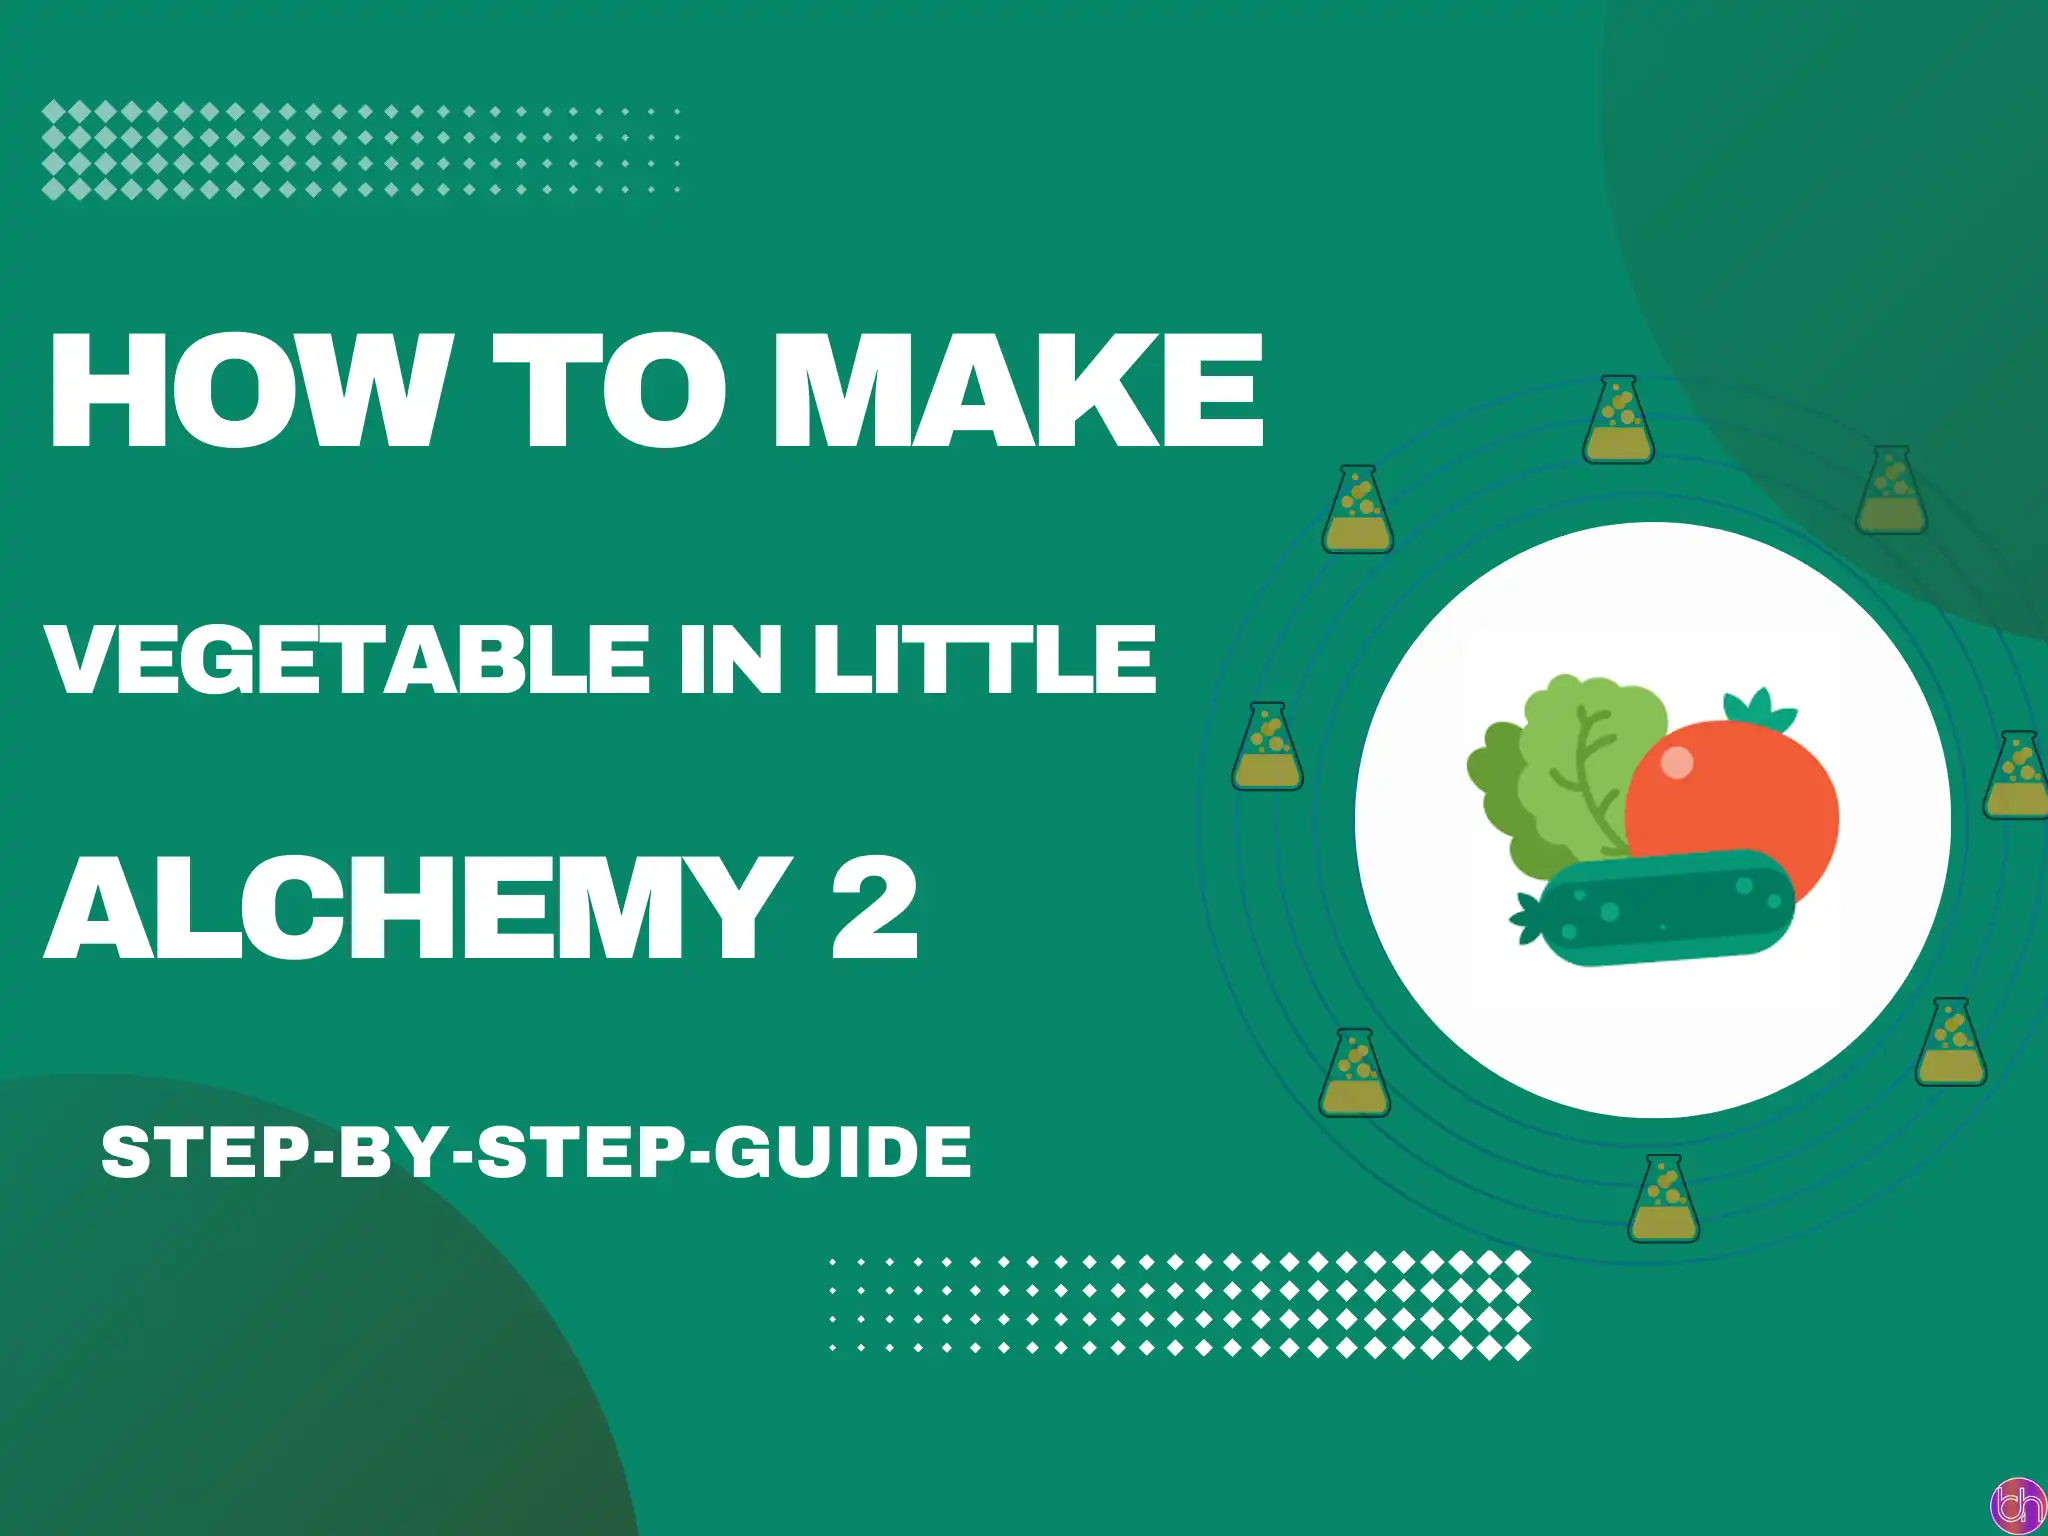 How to make Vegetable in Little Alchemy 2